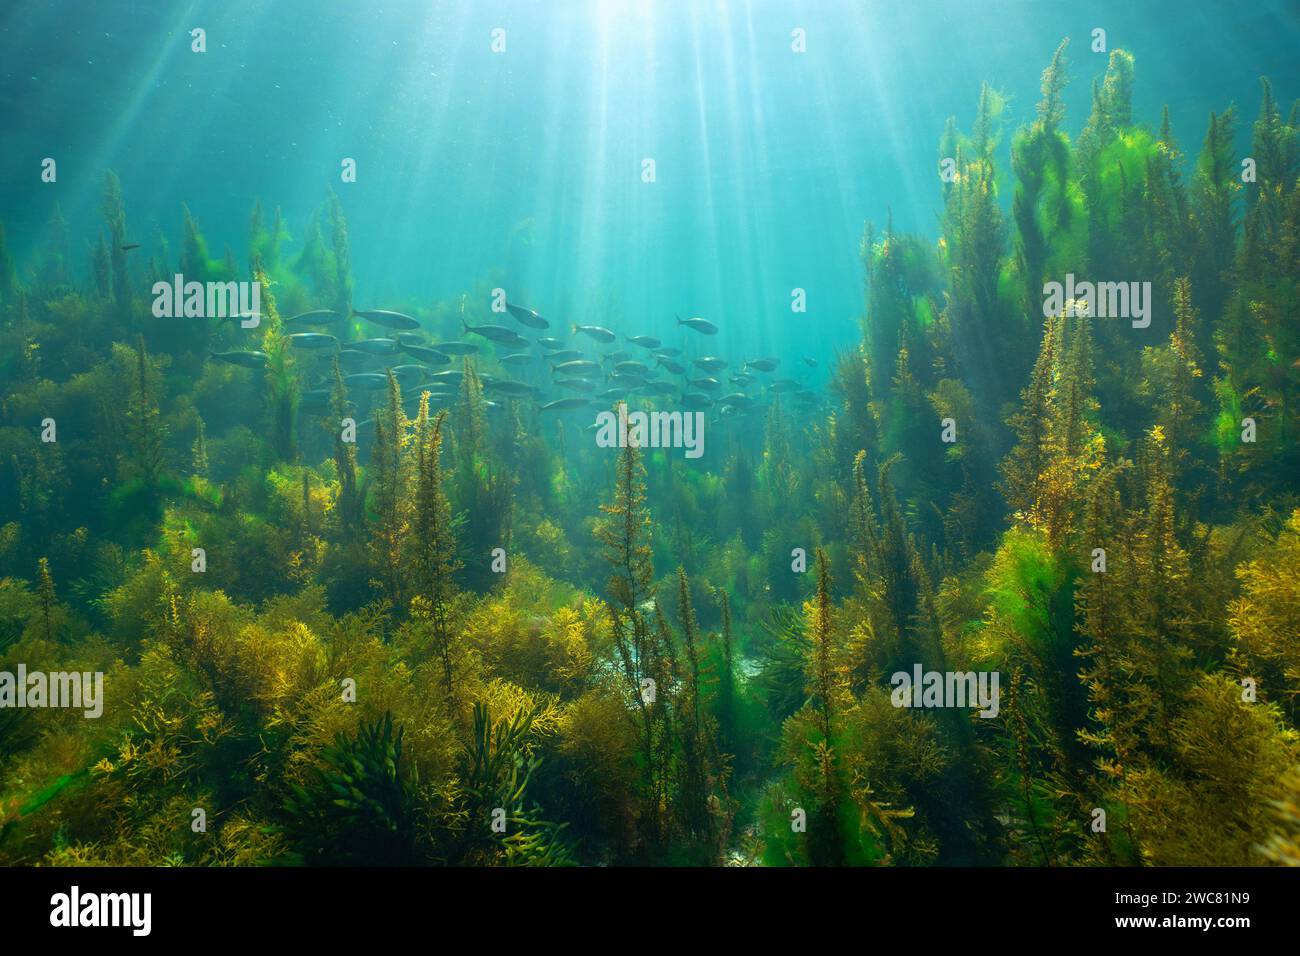 Sunlight underwater with seaweed and a school of fish (bogue) in the Atlantic ocean, natural scene, Spain, Galicia, Rias Baixas Stock Photo